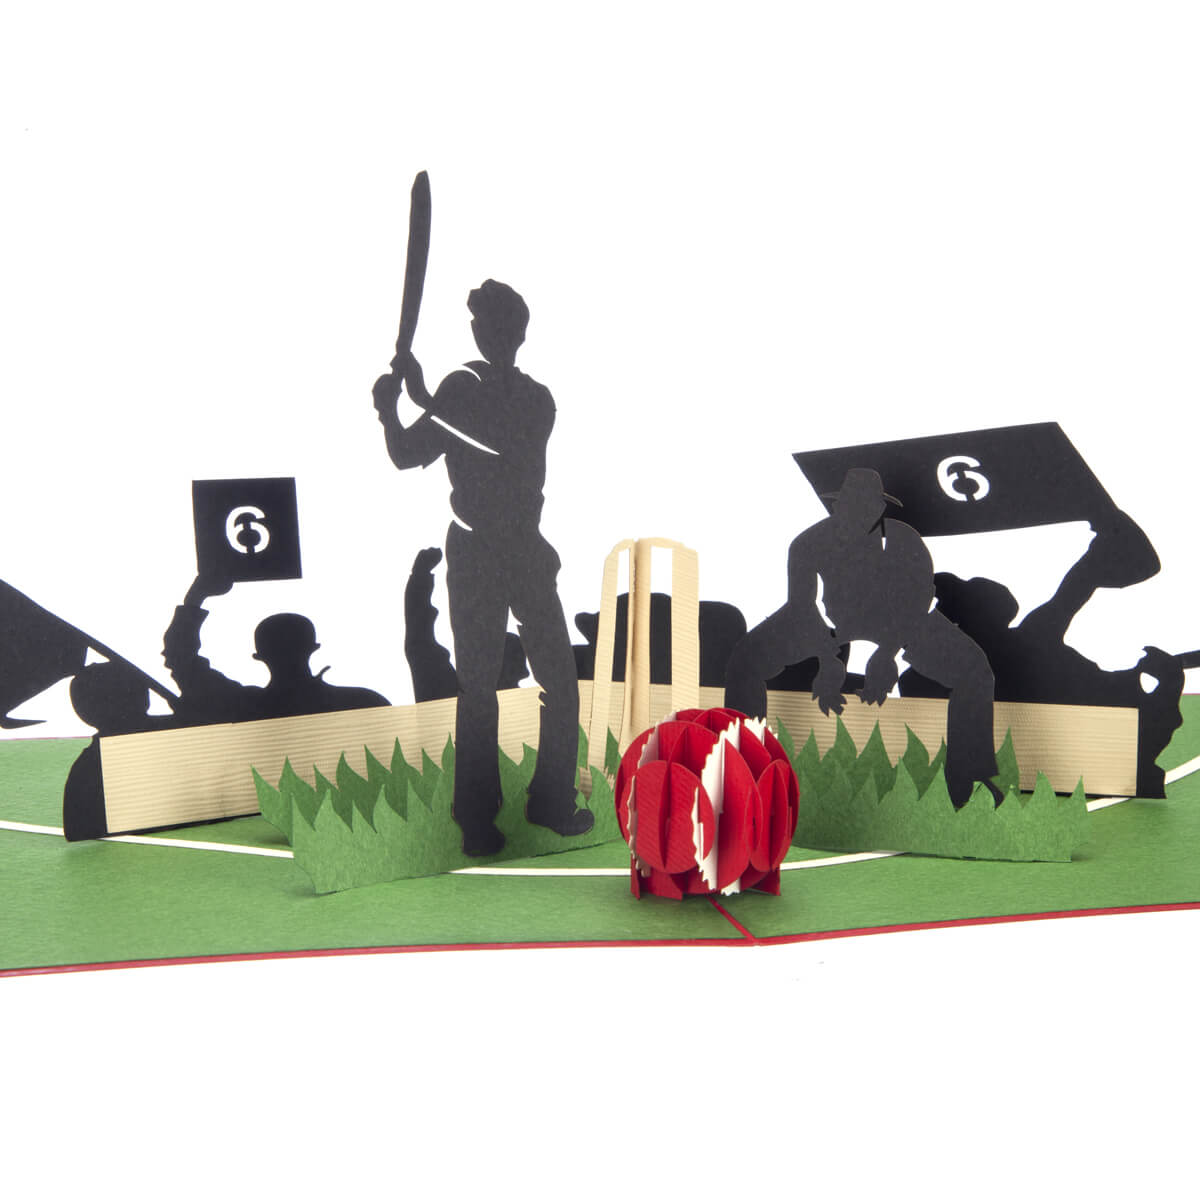 close up image of Cricket Pop Up Card featuring a 3D cricket scene with a batsman, wicket keeper, cricket ball and spectators